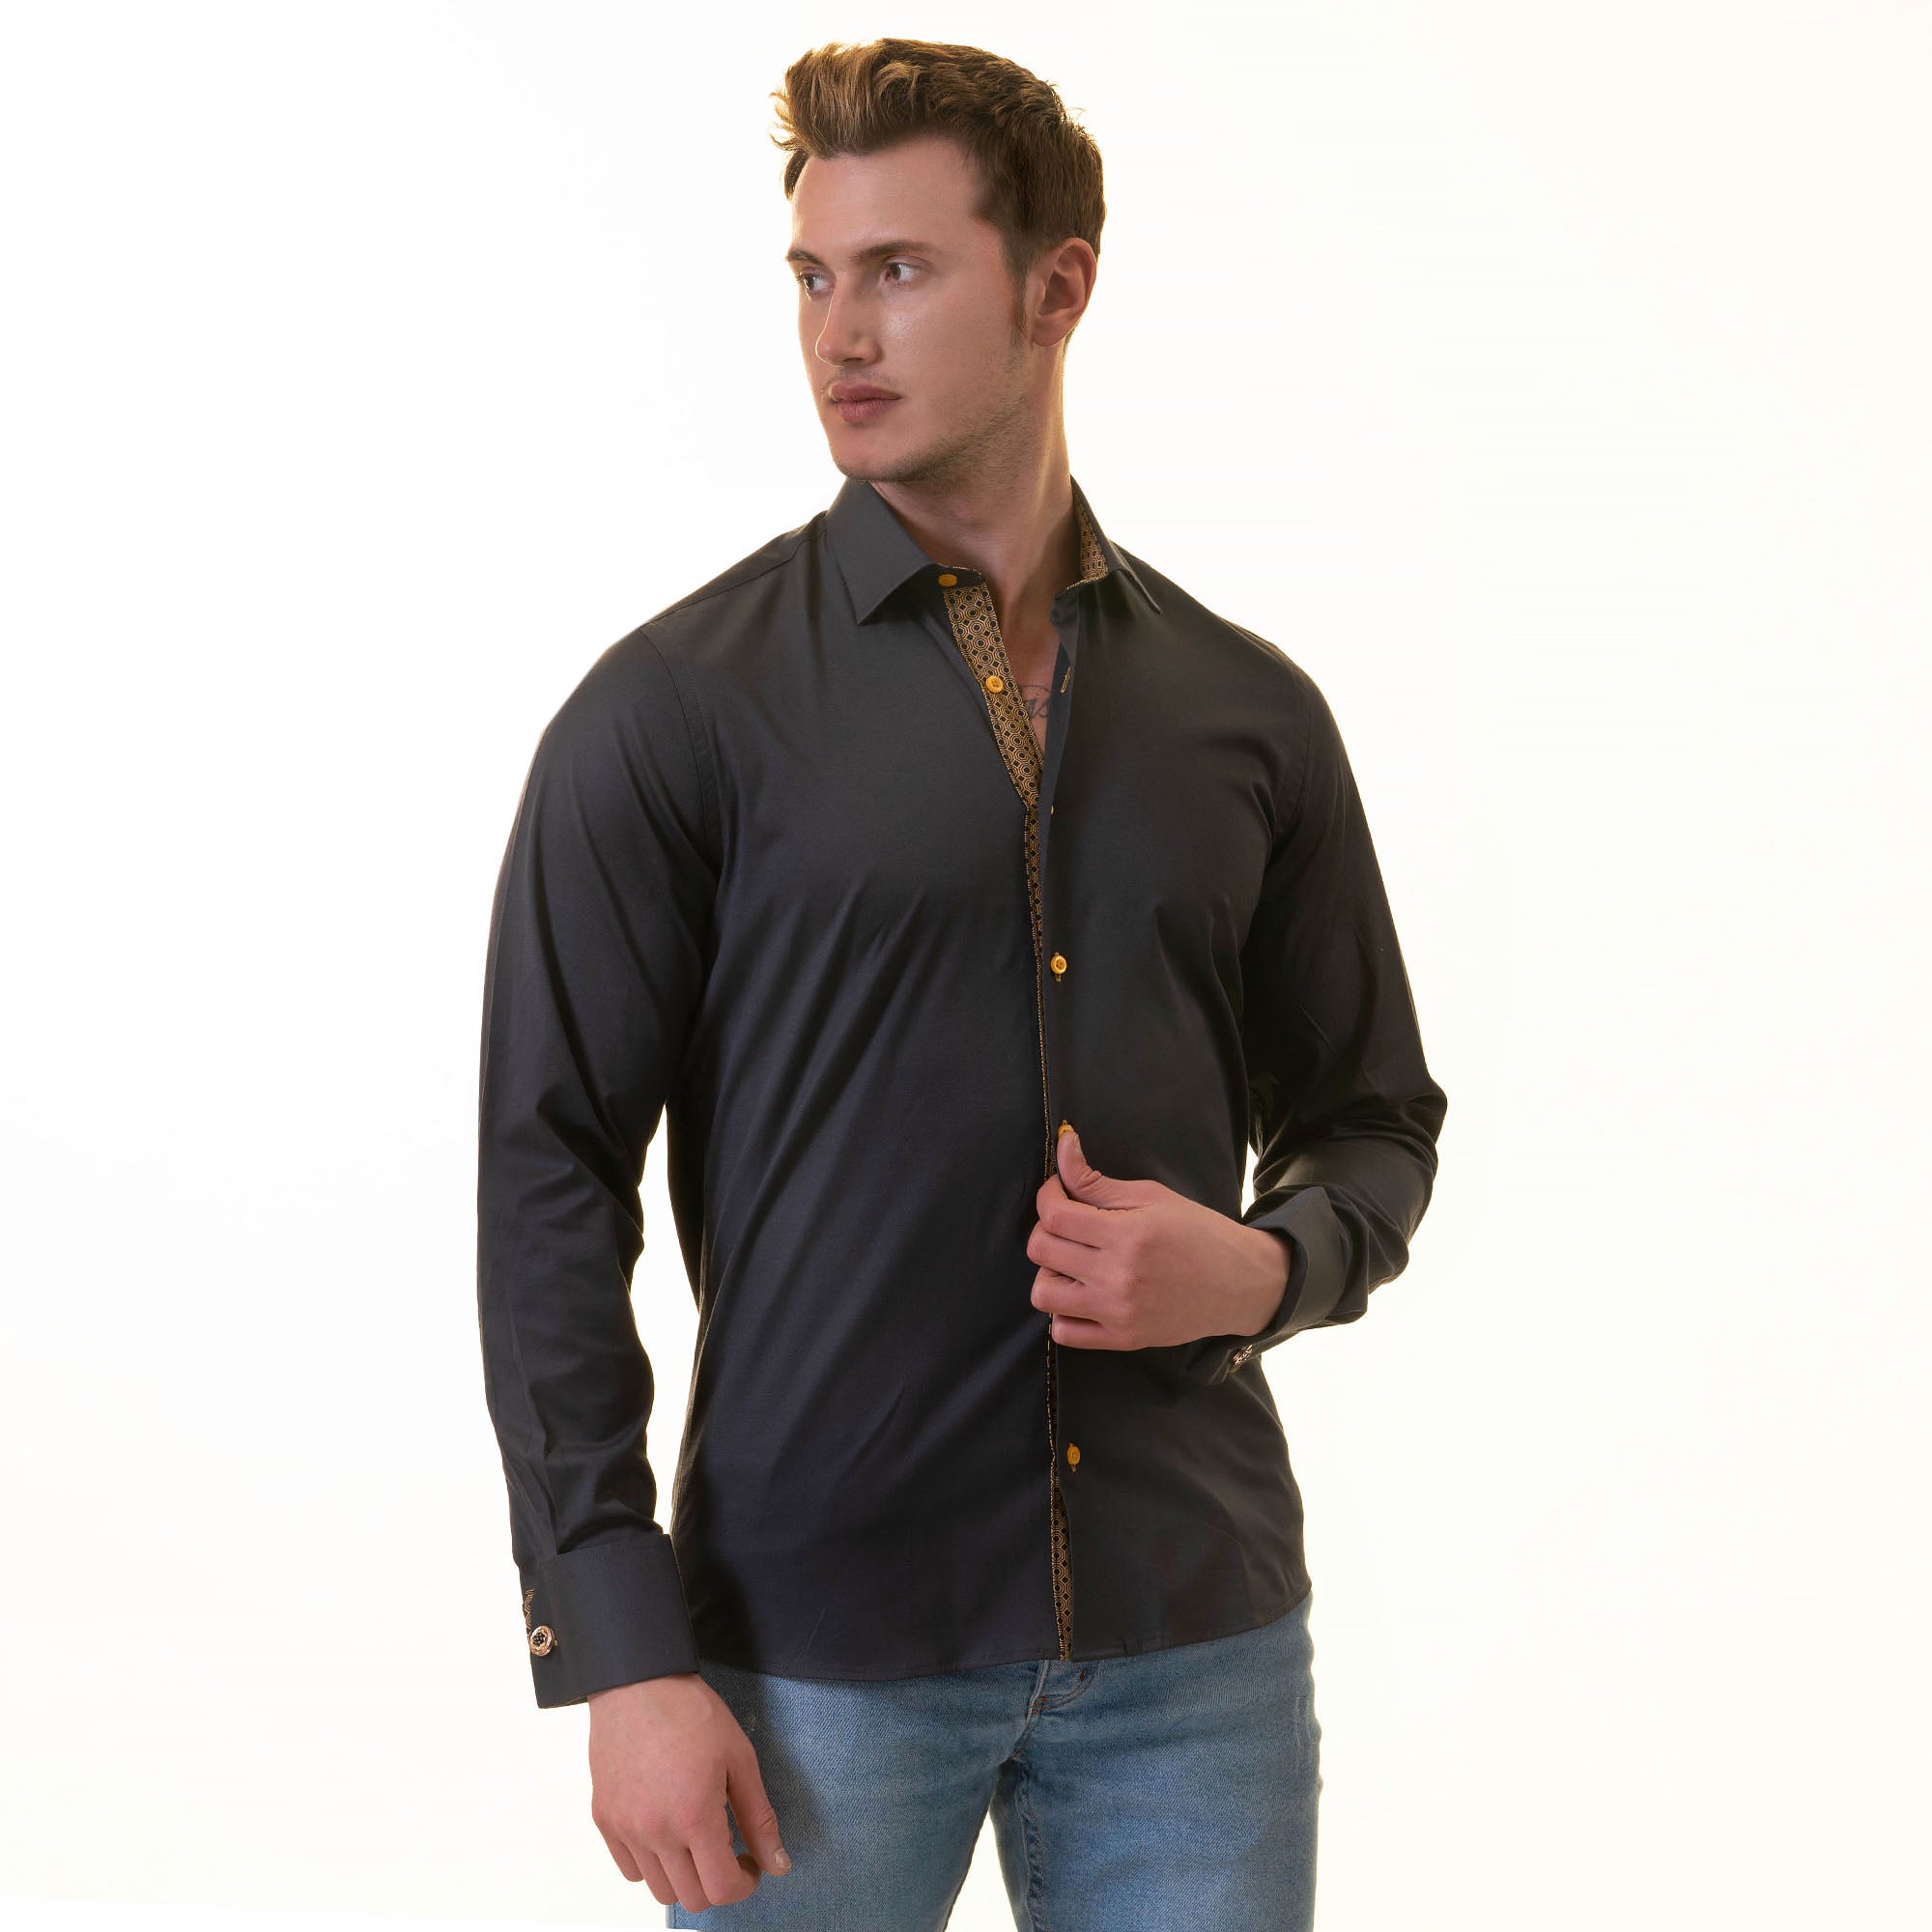 Black inside honeycomb Mens Slim Fit Designer French Cuff Shirt - tailored Cotton Shirts for Work and Casual Wear